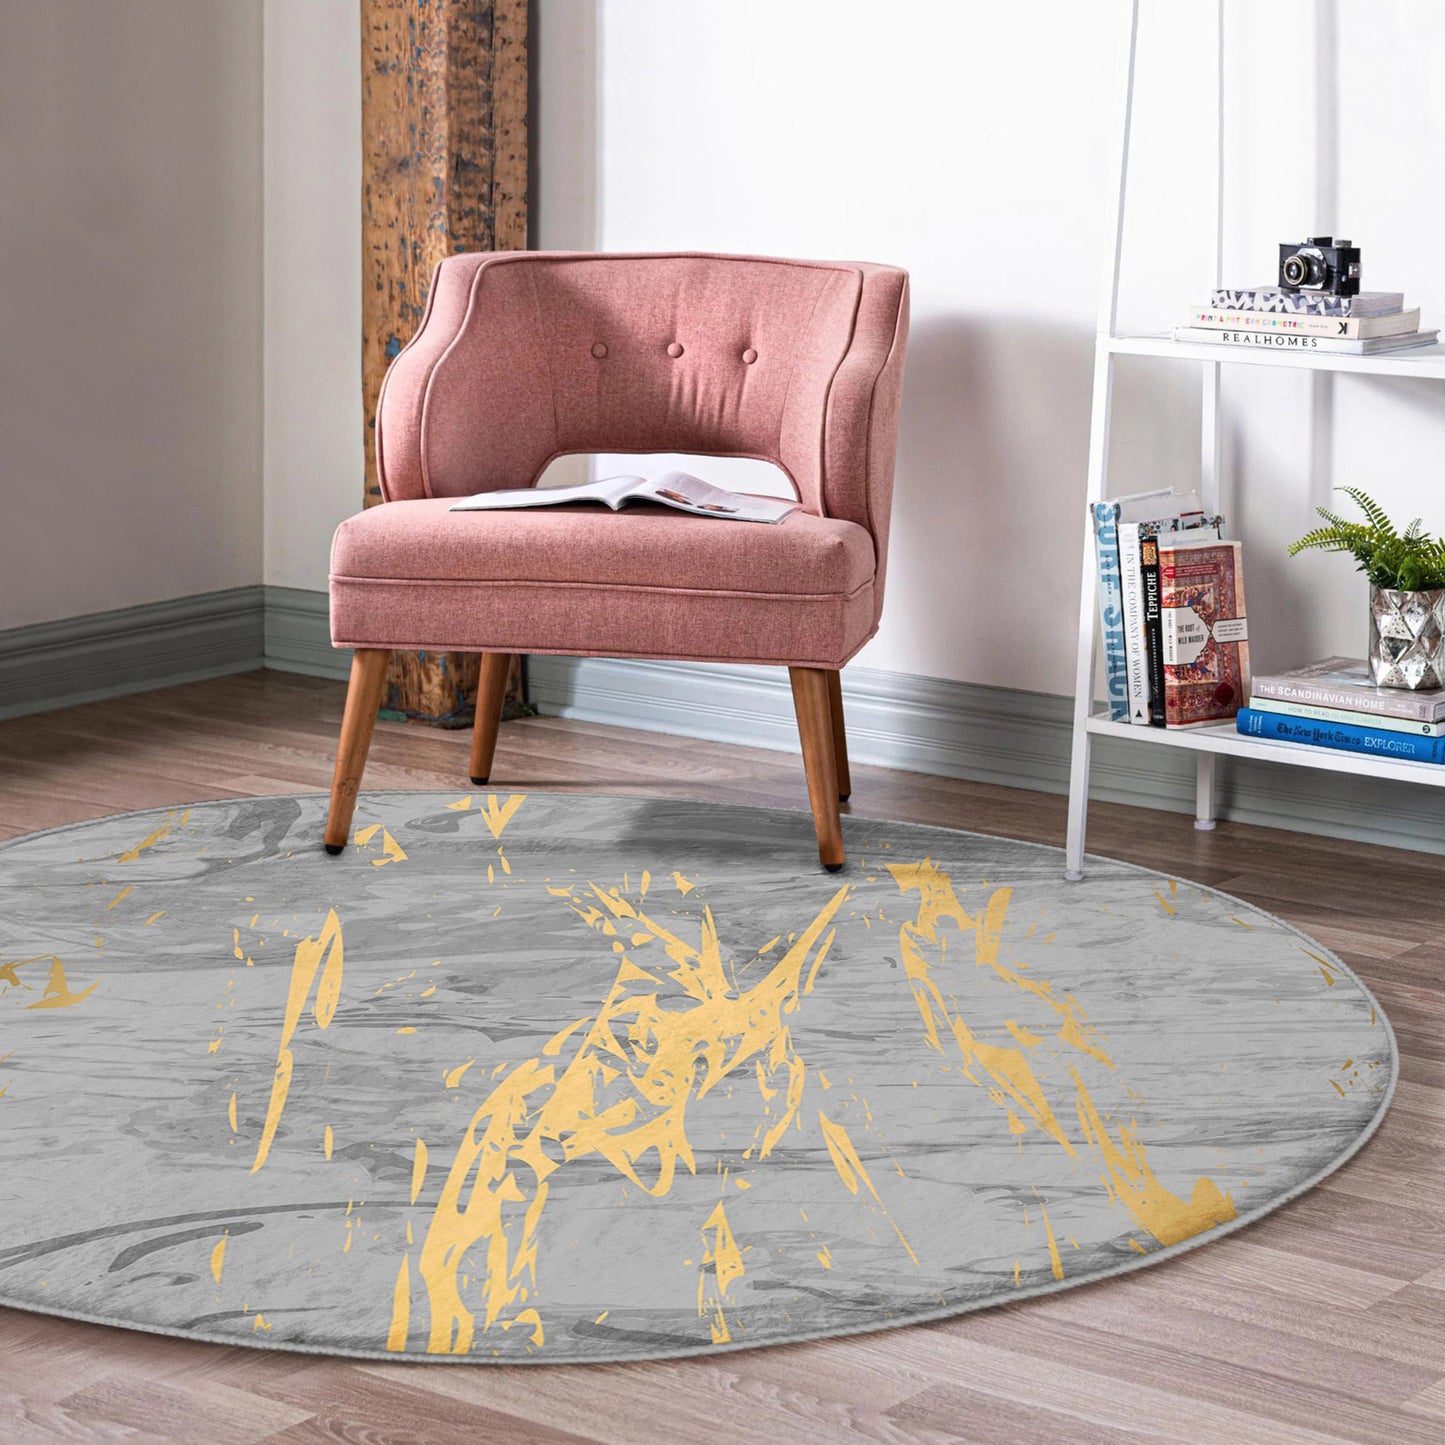 Gray Marble Patterned Round Rug, Luxury Living Room Area Rug, Bedroom